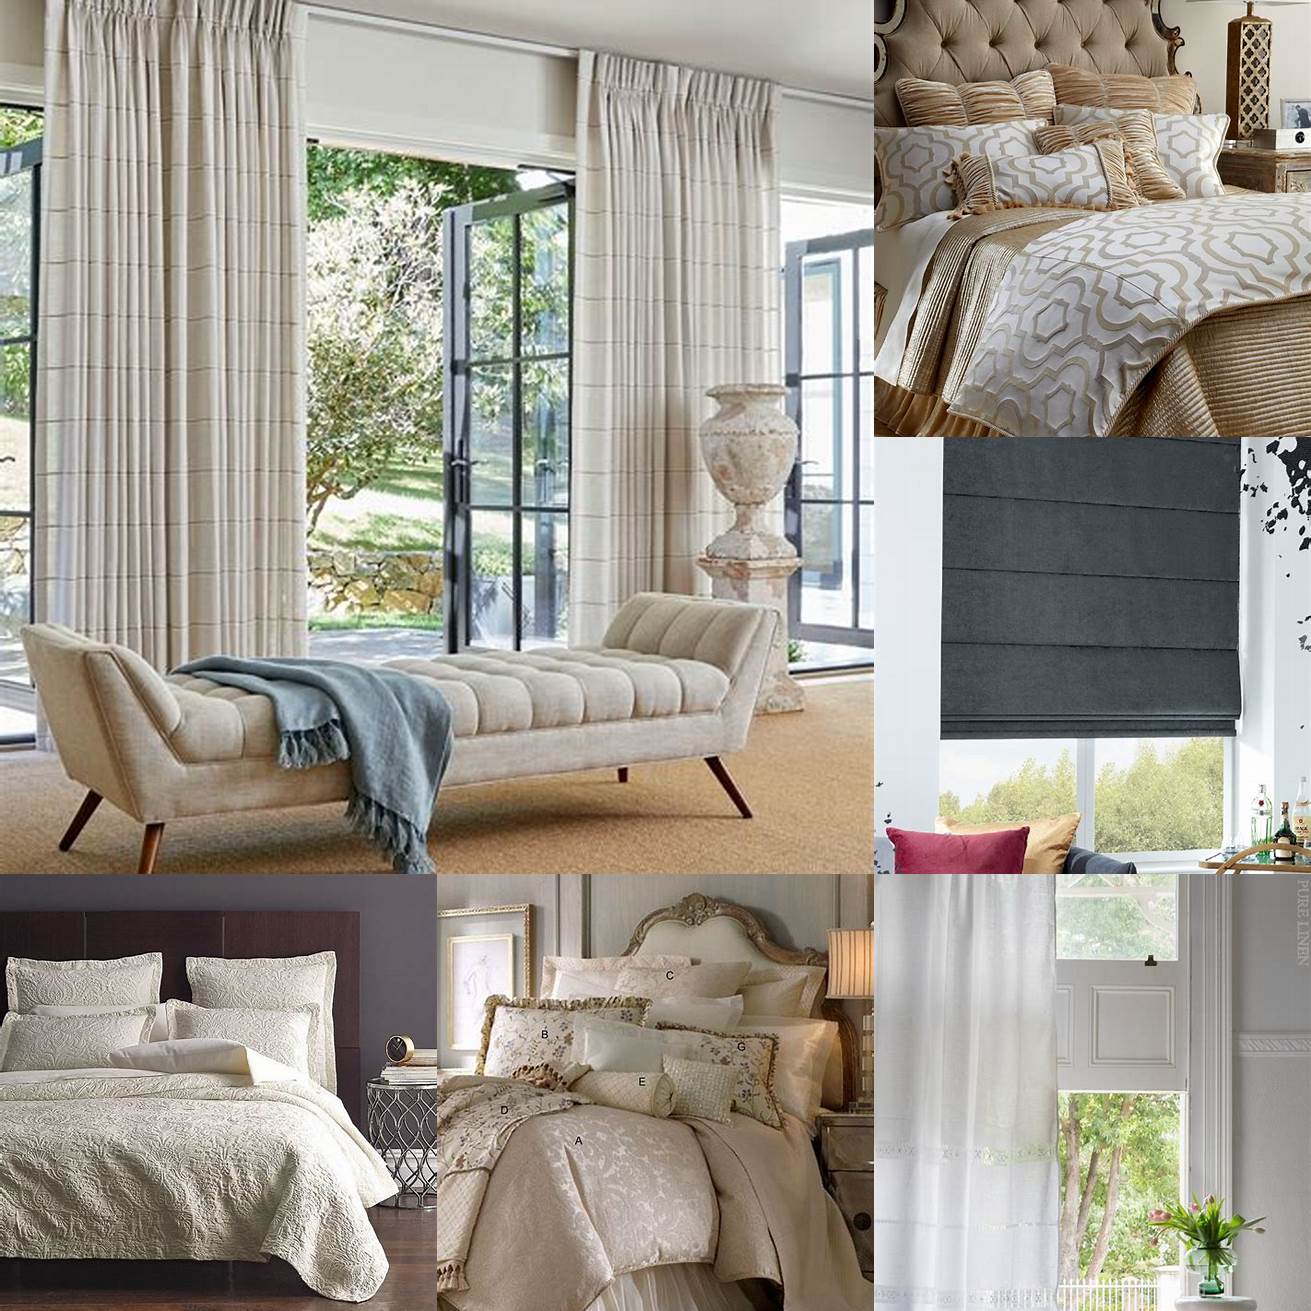 Linen A luxurious and lightweight material that adds elegance and sophistication to your windows